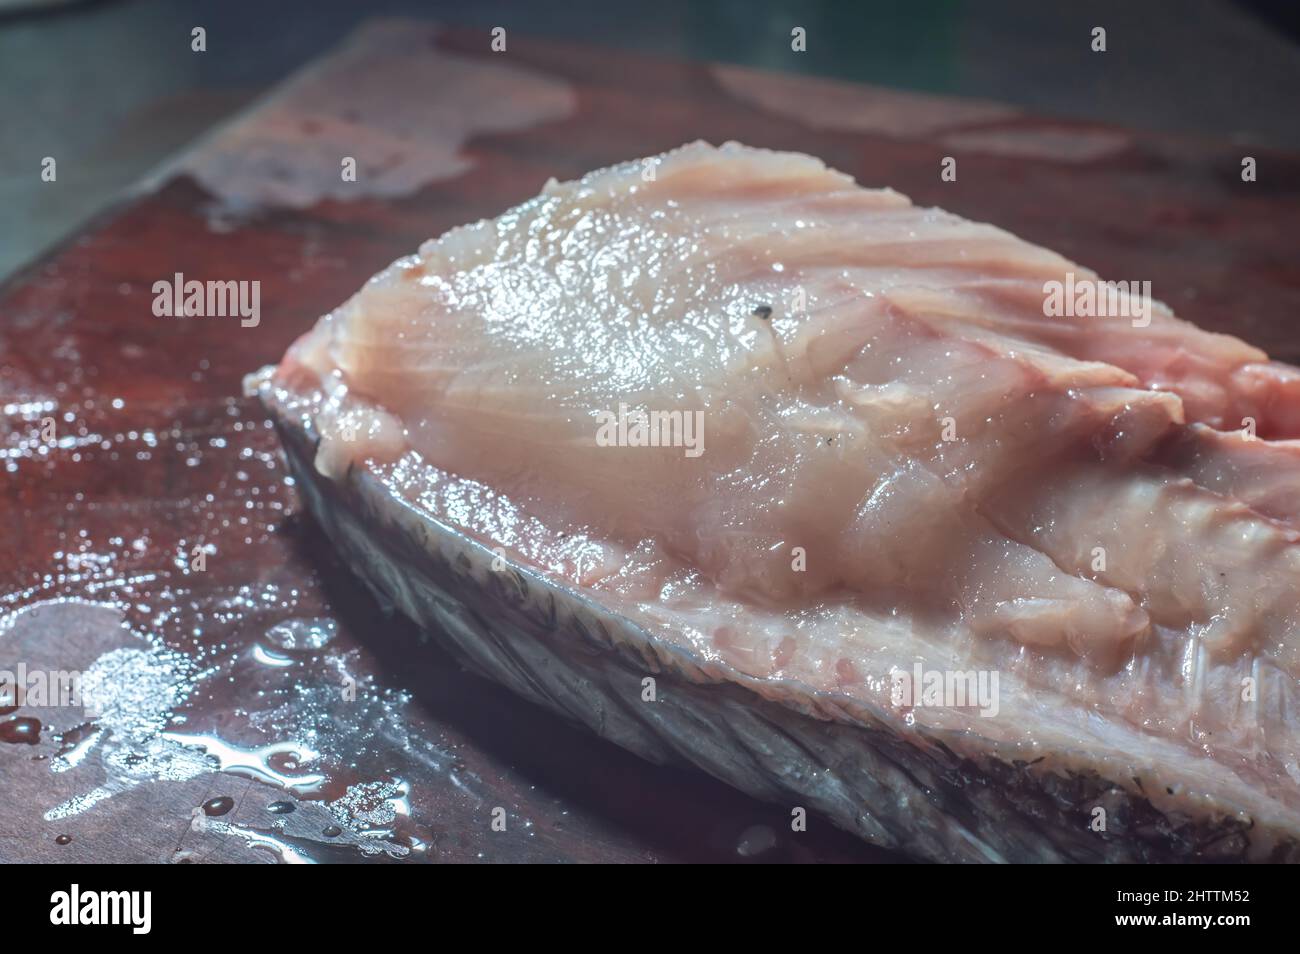 How to scrape tilapia fish using a knife,man wiping a fish on a wooden table. Stock Photo